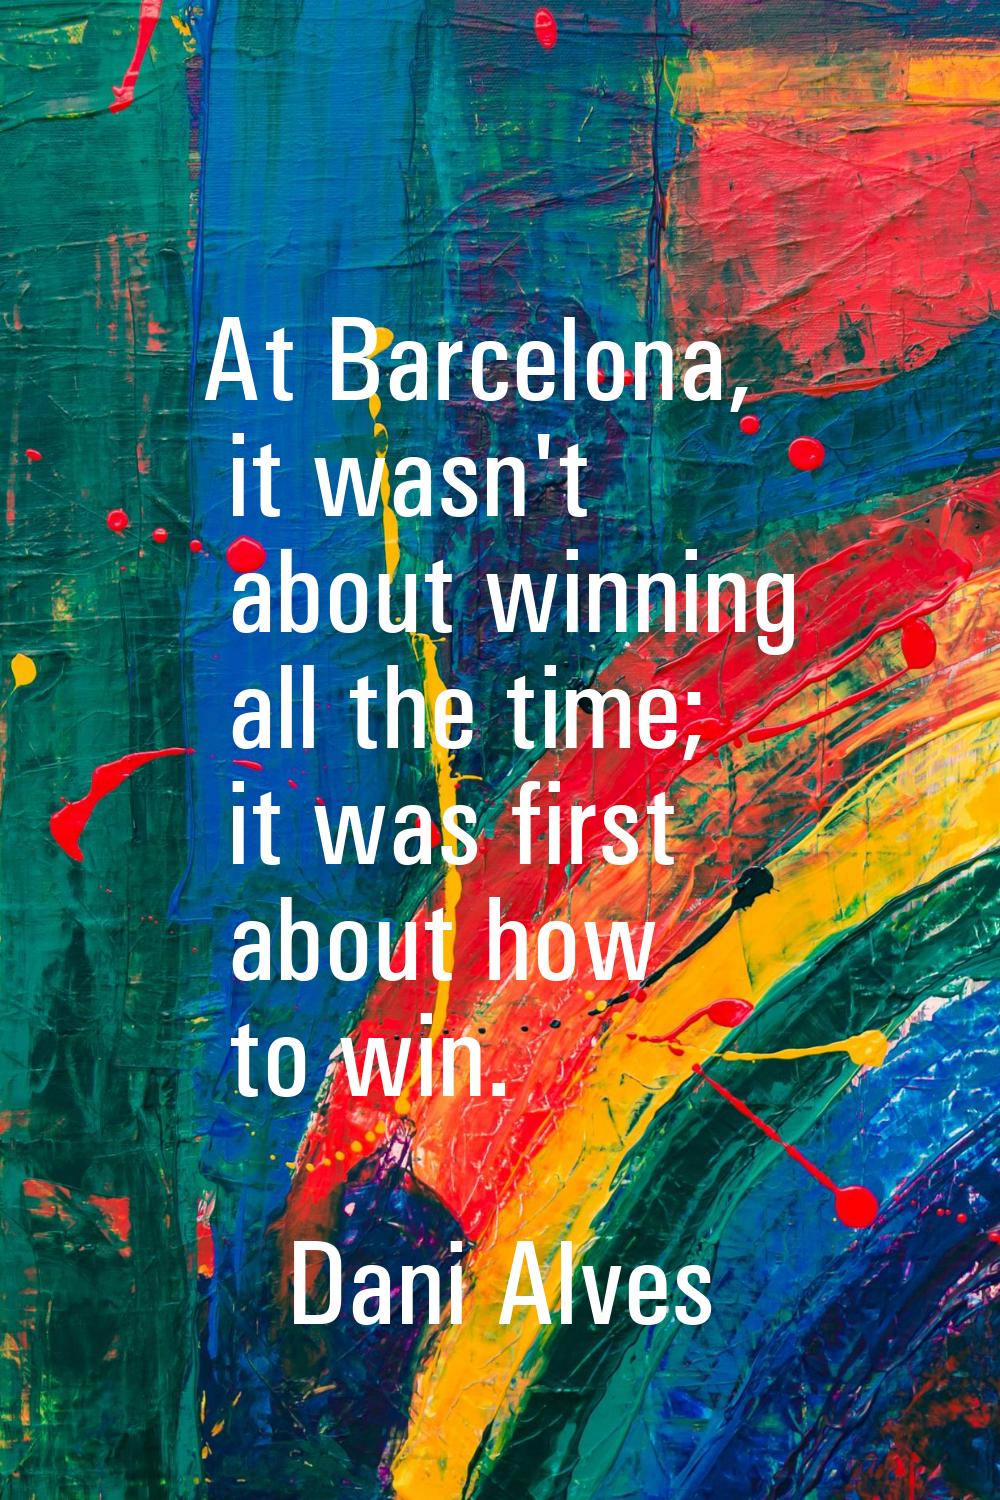 At Barcelona, it wasn't about winning all the time; it was first about how to win.